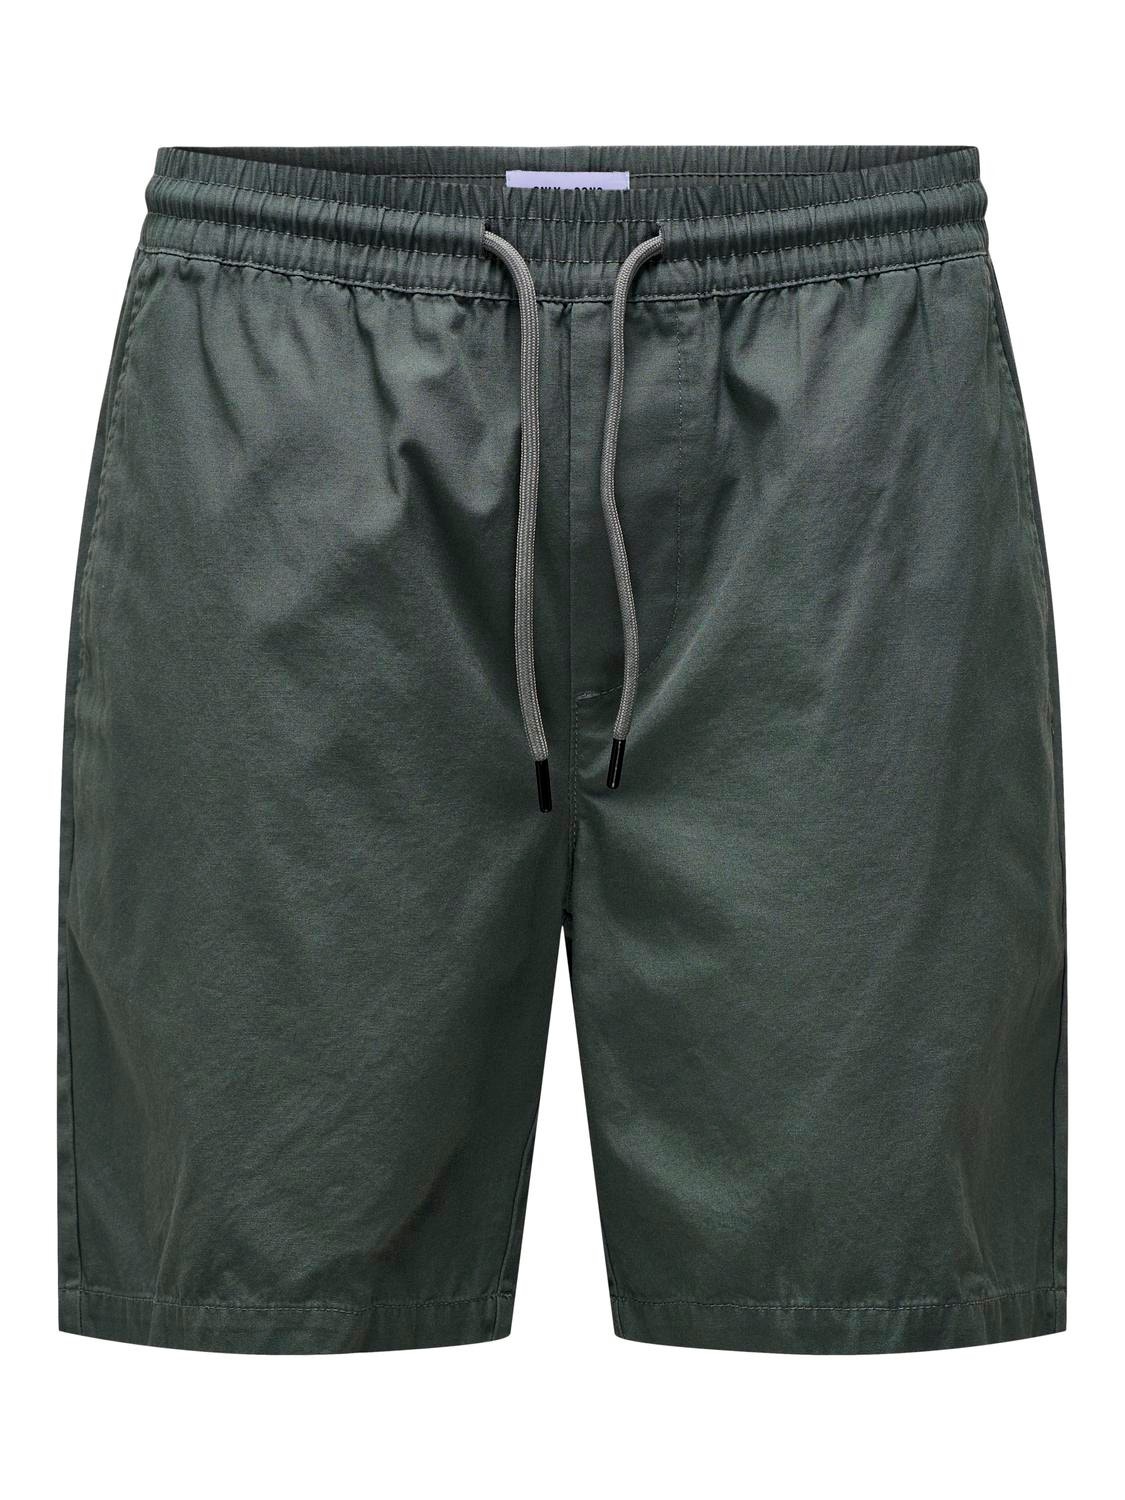 ONLY & SONS Regular fit Shorts -Balsam Green - 22027949